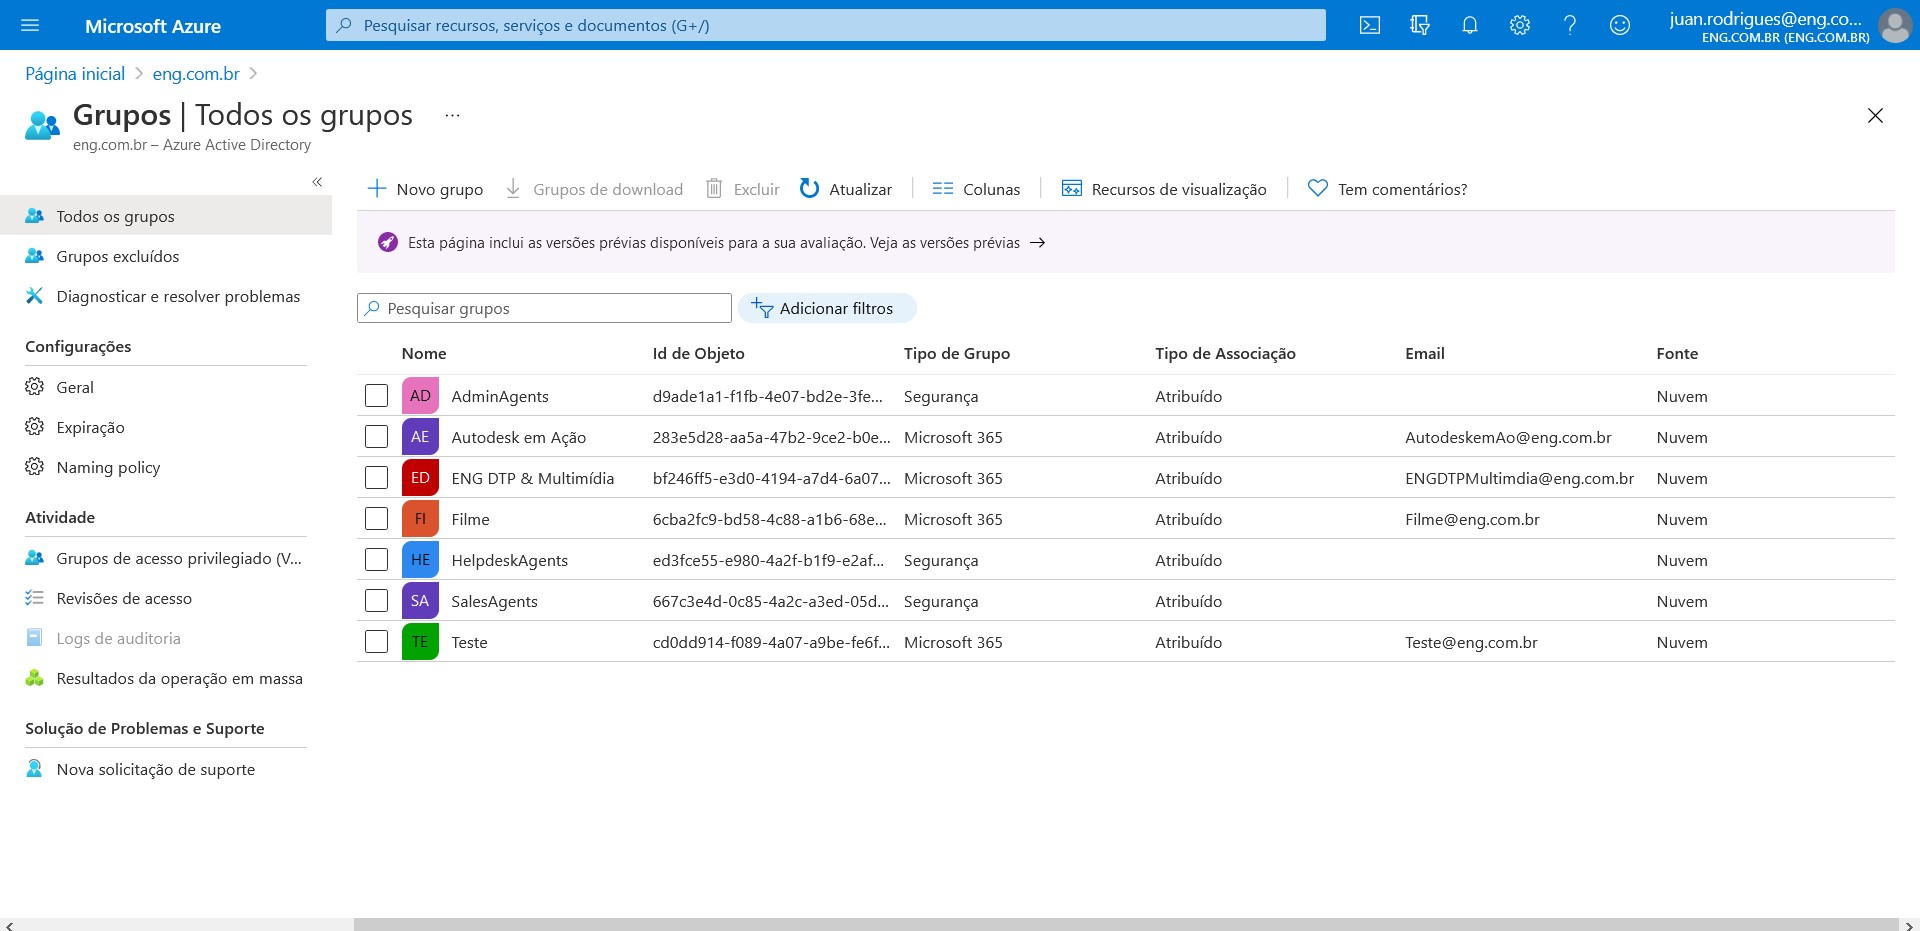 azure-active-directory-power-apps-eng-dtp-multimidia